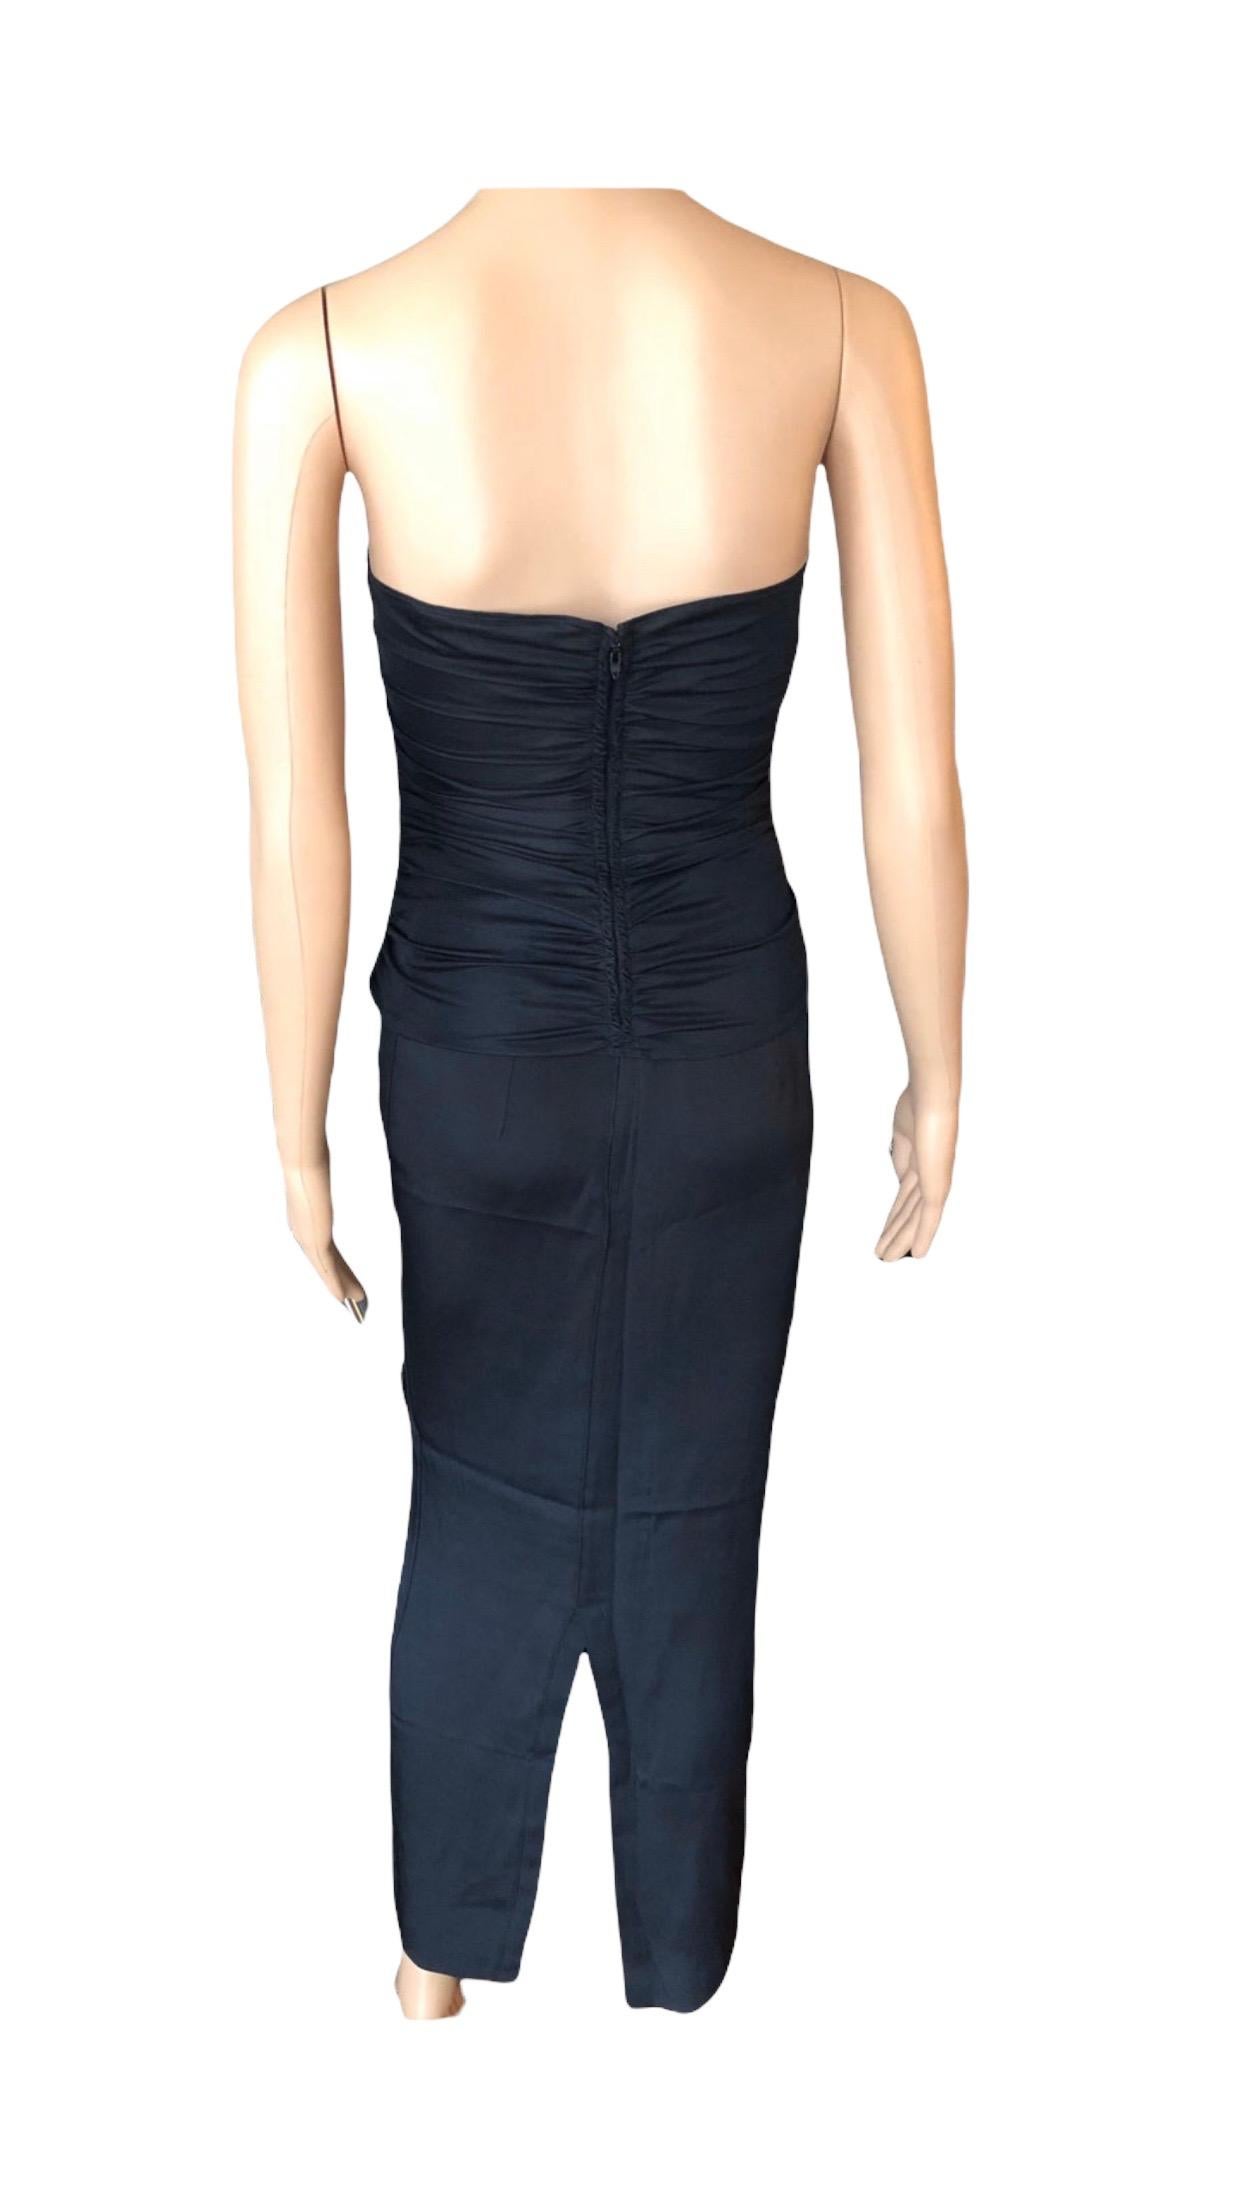 Gianni Versace F/W 1987 Vintage Sera Embellished Bustier Top&Skirt 2-Piece Suit  For Sale 3